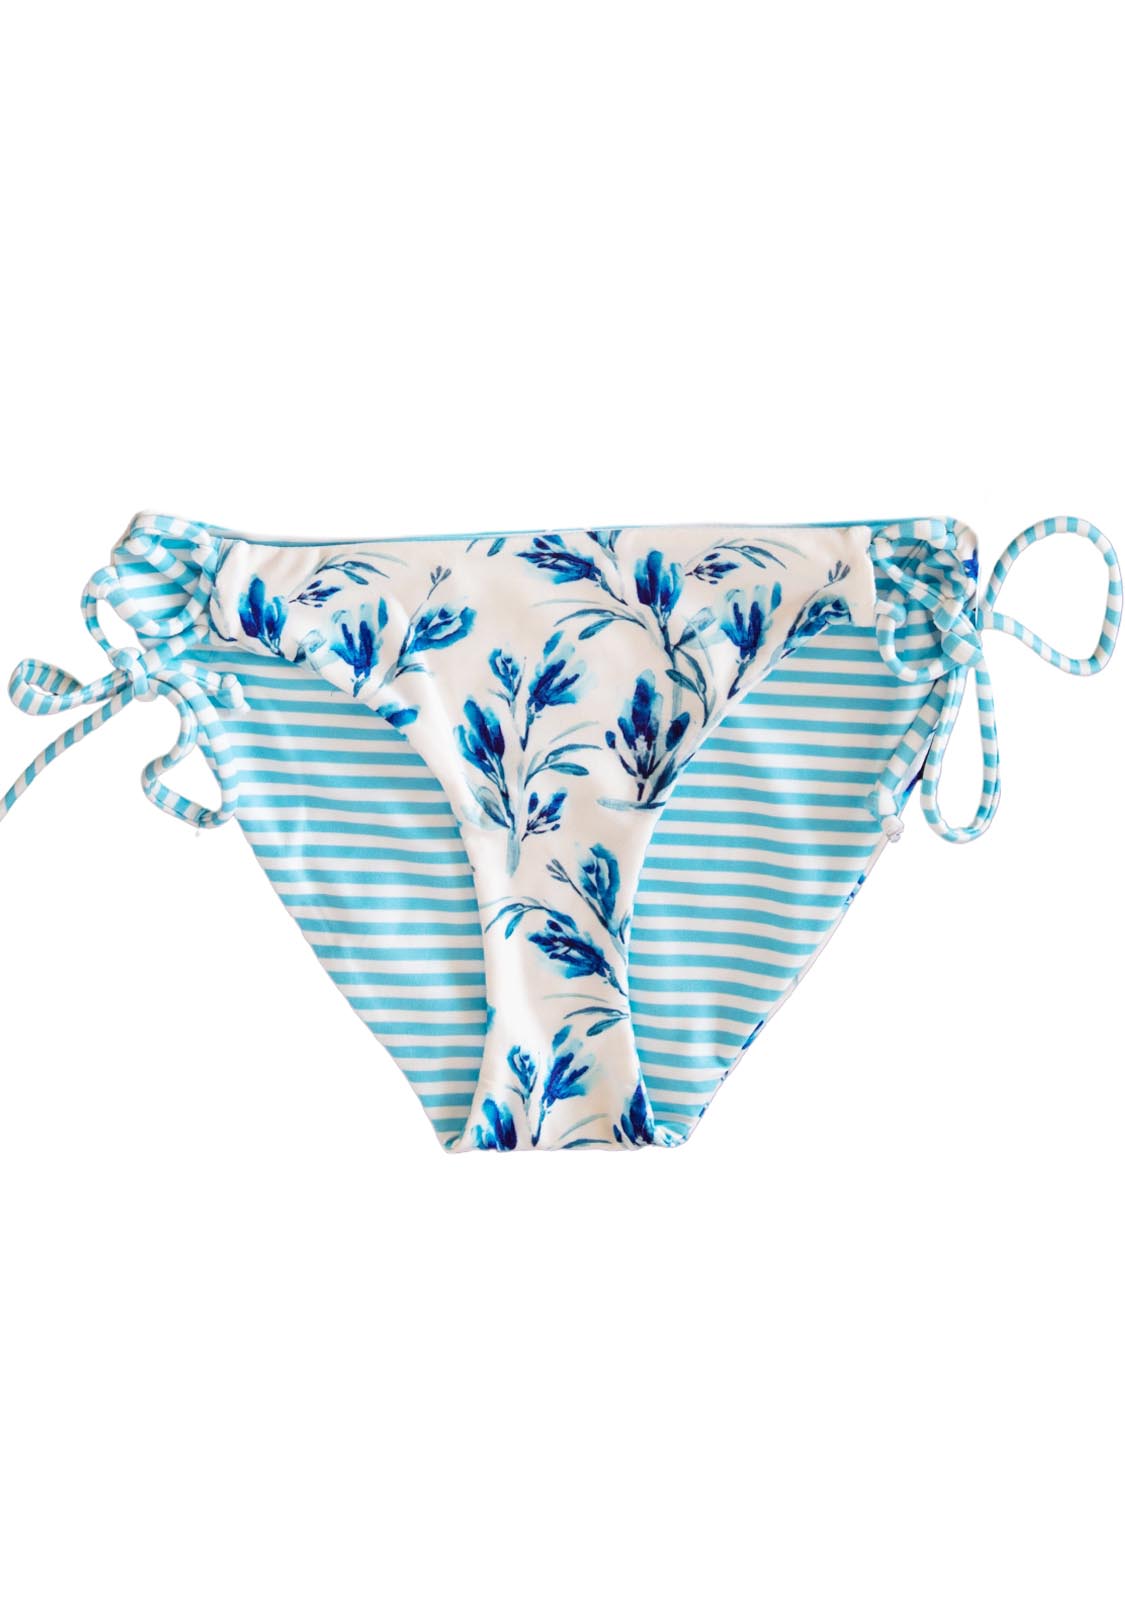 Reversible Classic swimsuit bottoms with Floral and stripe design and adjustable side ties for a perfect and comfortable fit